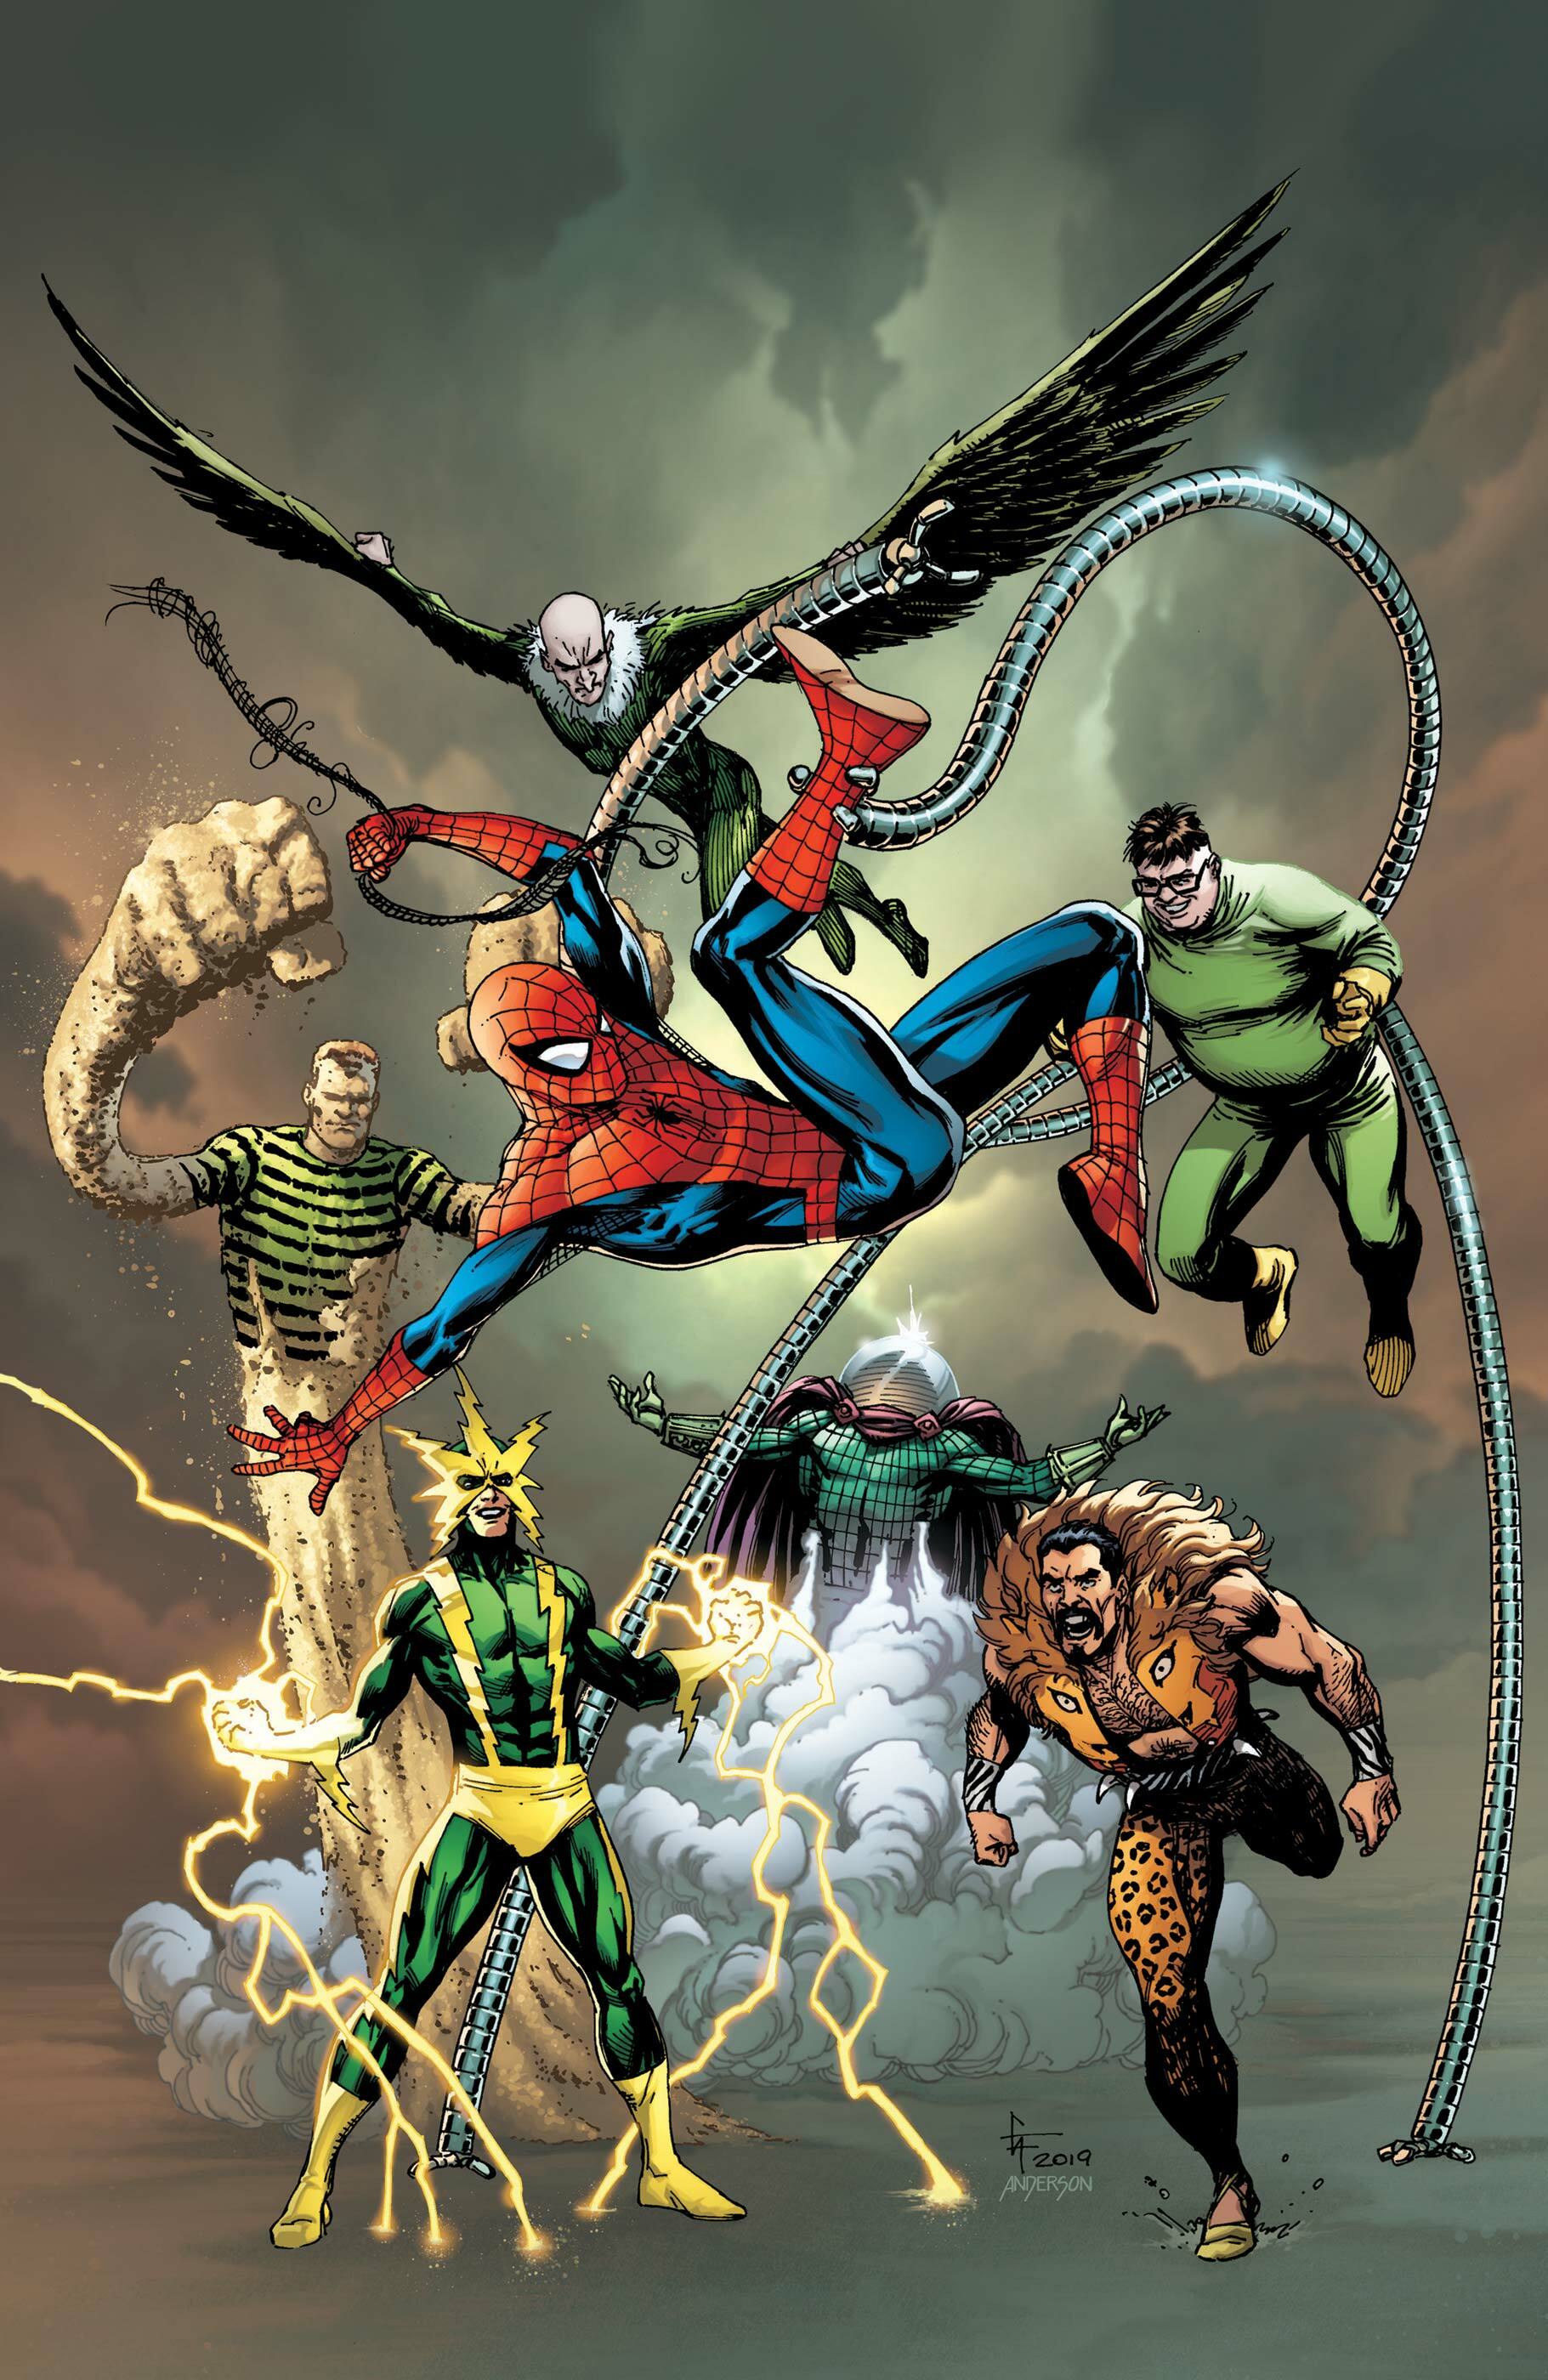 Sinister Six screenshots, image and picture